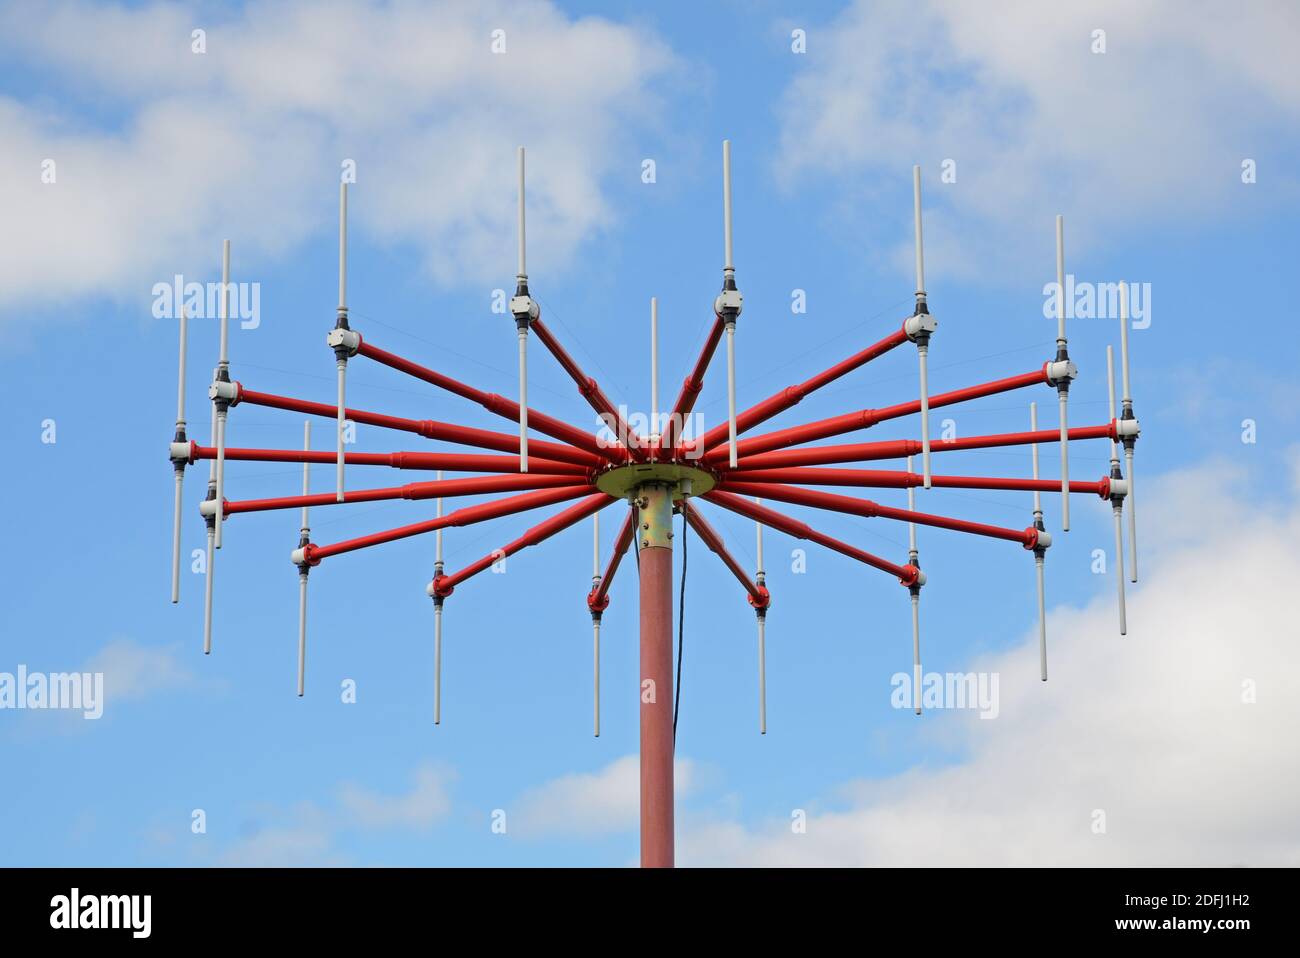 Red airfield antenna with dipoles on sky background Stock Photo